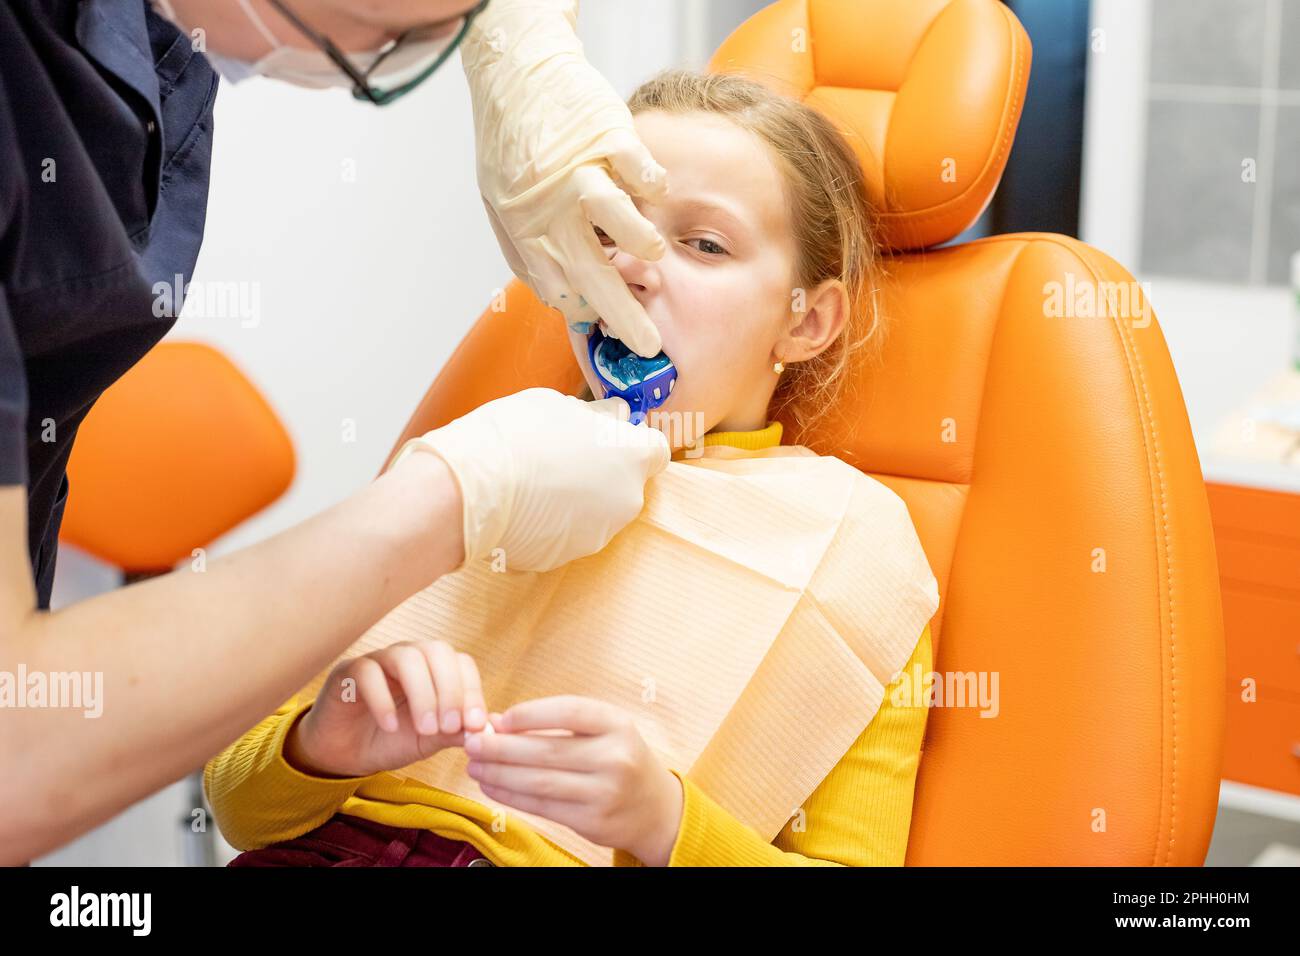 Dentist examining a patient's teeth using dental equipment impression spoon in dentistry office.Child during orthodontist visit and oral cavity check Stock Photo